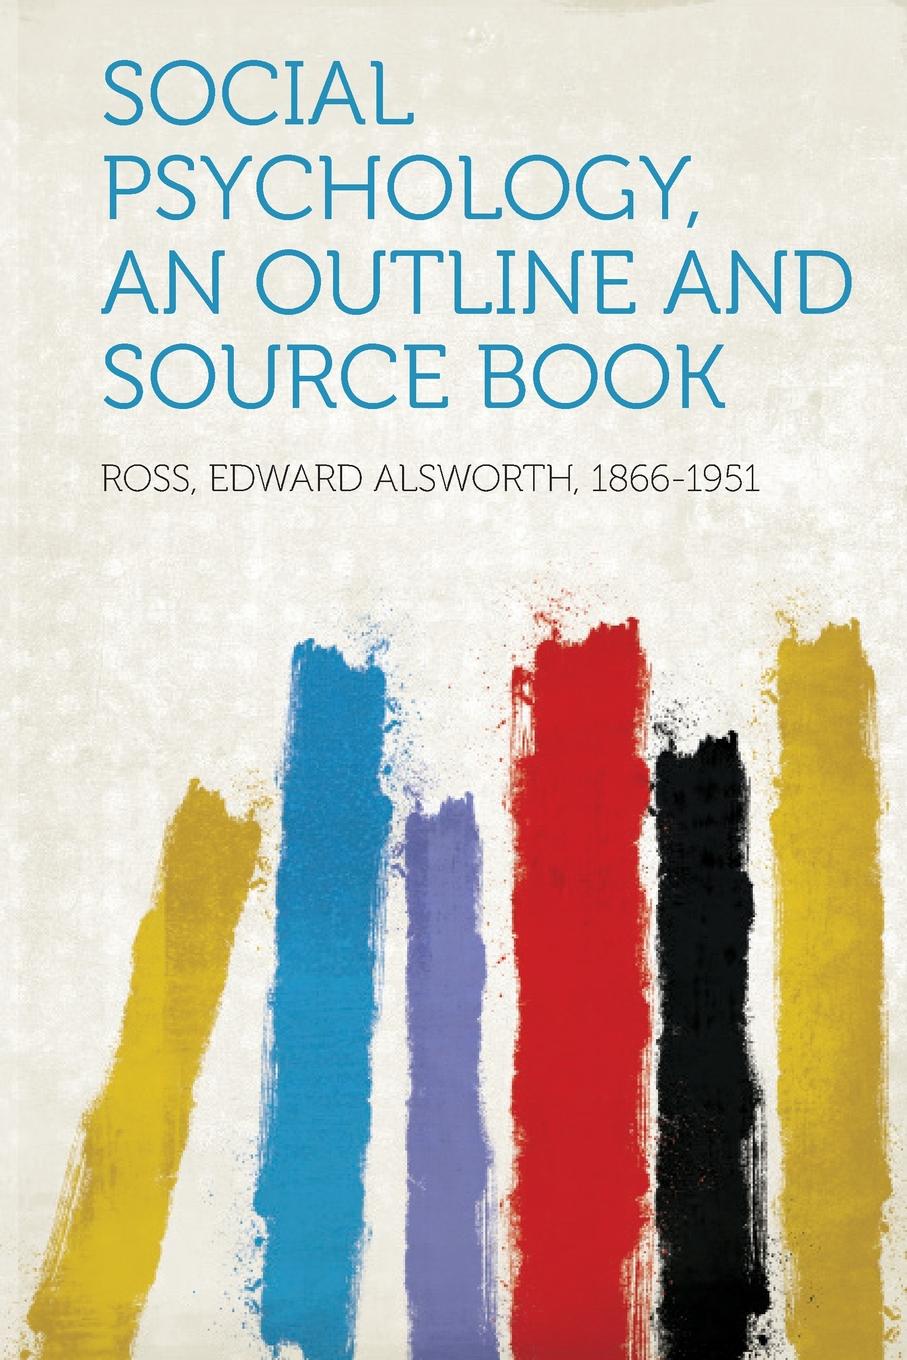 Social Psychology, an Outline and Source Book